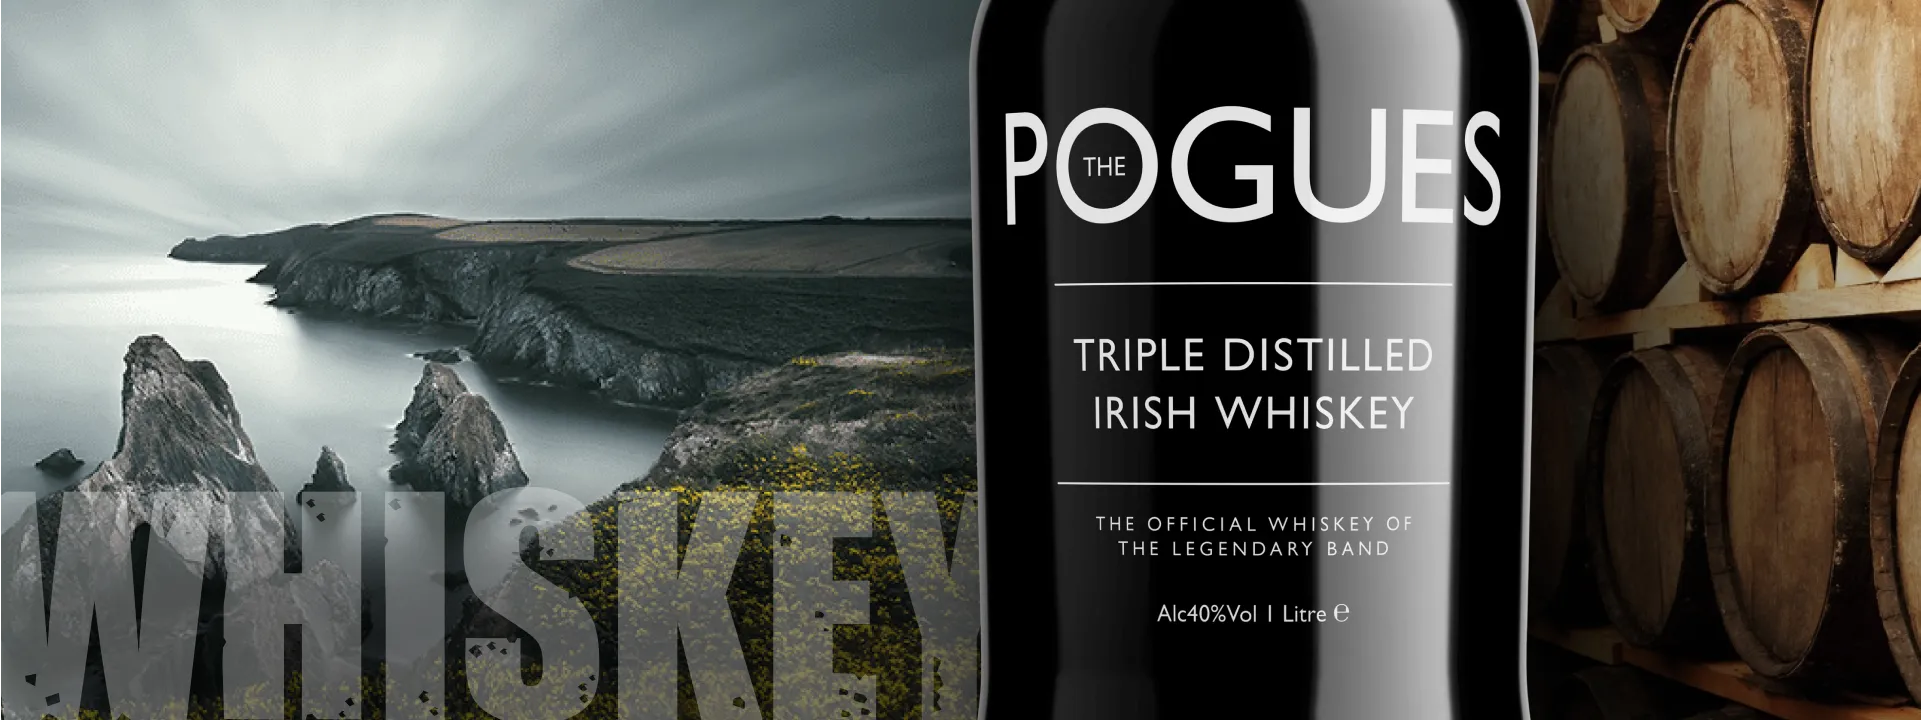 Фото 3 The Pogues Blended Irish Whiskey